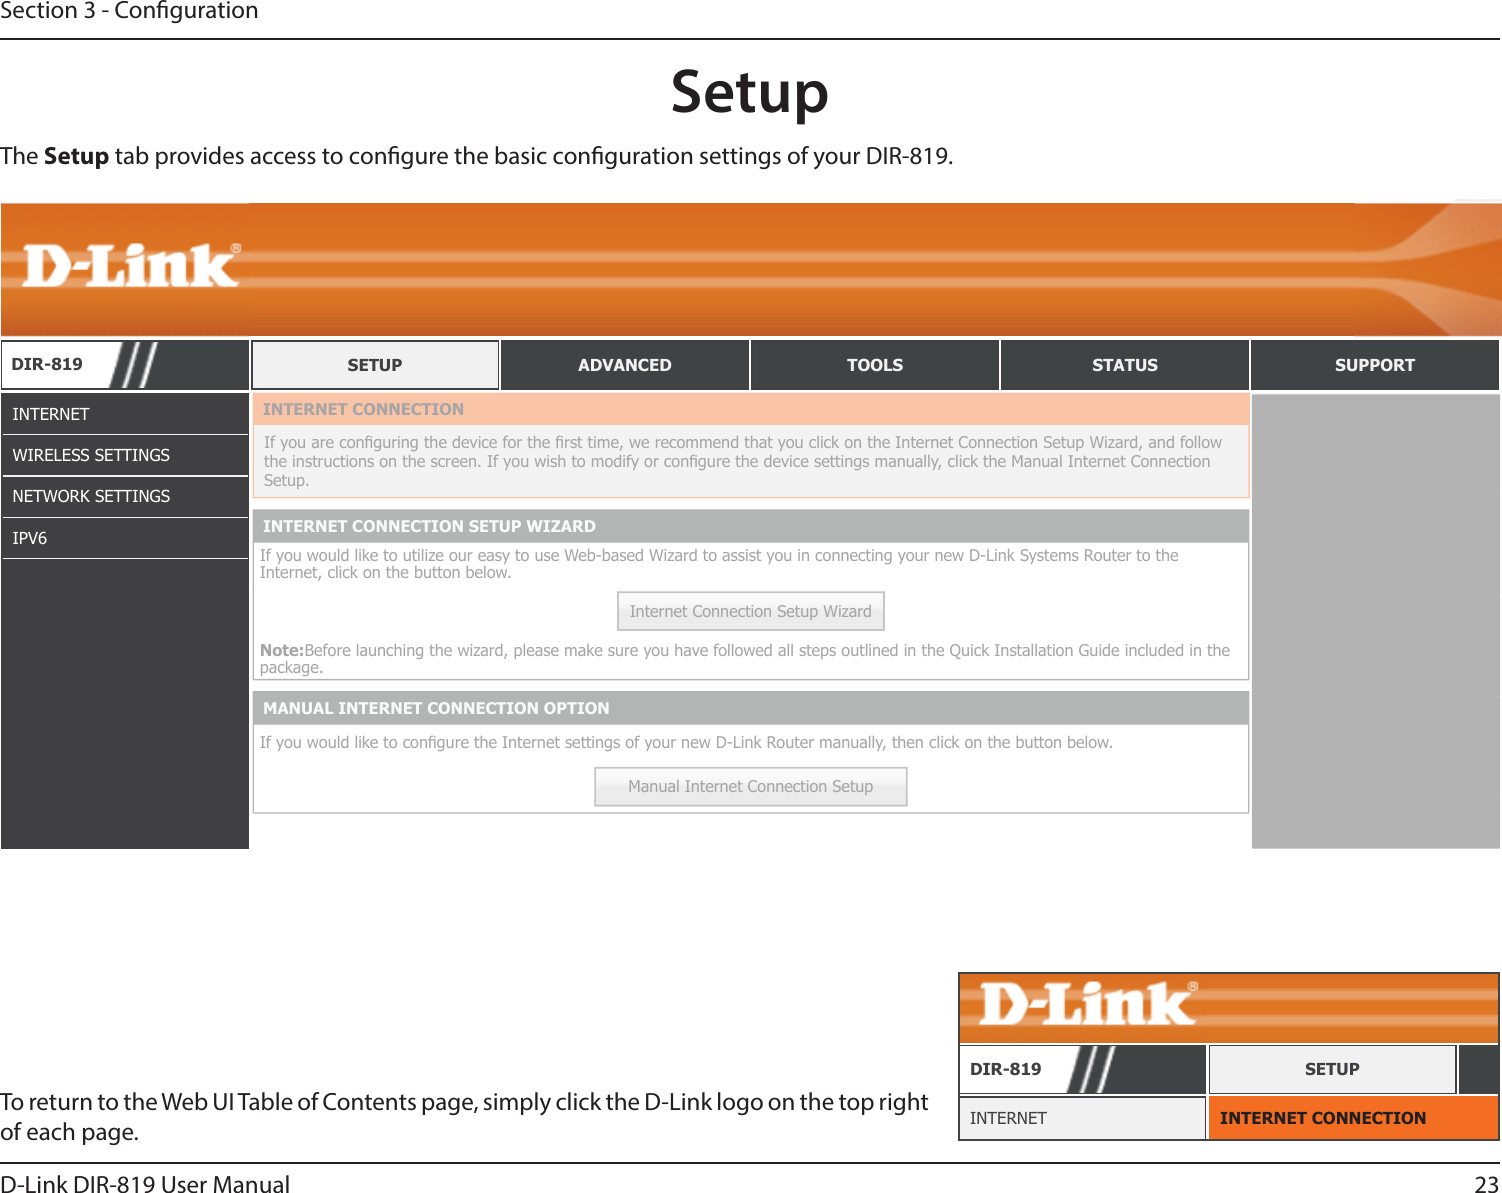 23D-Link DIR-819 User ManualSection 3 - CongurationSetupINTERNETWIRELESS SETTINGSNETWORK SETTINGSIPV6The Setup tab provides access to congure the basic conguration settings of your DIR-819.To return to the Web UI Table of Contents page, simply click the D-Link logo on the top right of each page. INTERNET CONNECTIONINTERNETDIR-819 SETUPDIR-819 SETUP ADVANCED TOOLS STATUS SUPPORTINTERNET CONNECTIONIf you are conguring the device for the rst time, we recommend that you click on the Internet Connection Setup Wizard, and follow the instructions on the screen. If you wish to modify or congure the device settings manually, click the Manual Internet Connection Setup.INTERNET CONNECTION SETUP WIZARDIf you would like to utilize our easy to use Web-based Wizard to assist you in connecting your new D-Link Systems Router to the Internet, click on the button below.Internet Connection Setup WizardNote:Before launching the wizard, please make sure you have followed all steps outlined in the Quick Installation Guide included in the package.MANUAL INTERNET CONNECTION OPTIONIf you would like to congure the Internet settings of your new D-Link Router manually, then click on the button below.Manual Internet Connection Setup